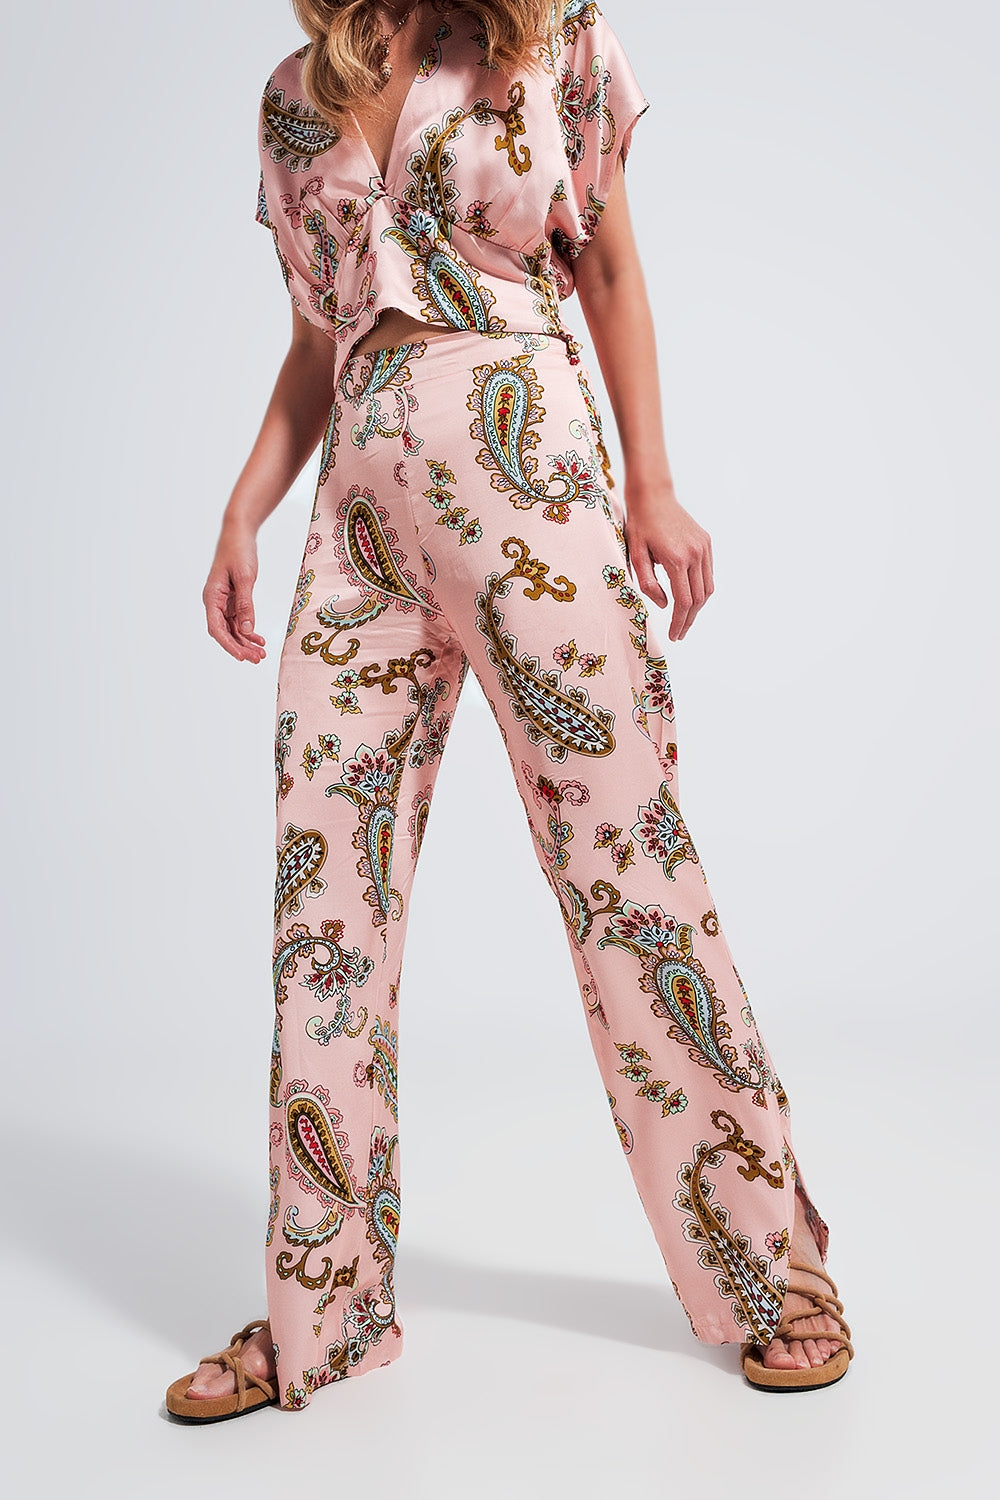 Wide leg pants in pink paisley floral